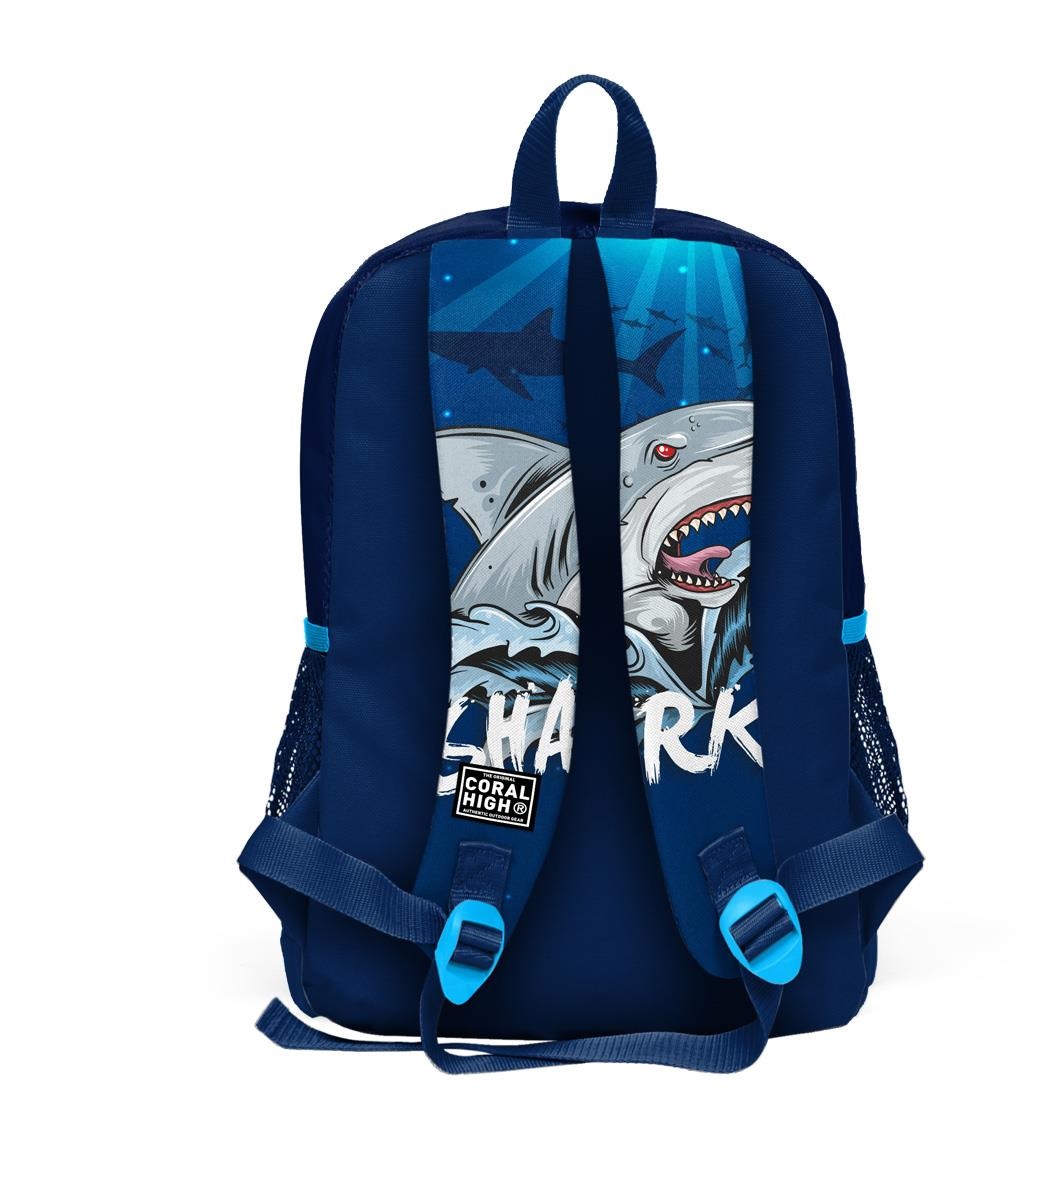 Coral High Kids Four Compartment School Backpack - Navy Blue Shark Pattern